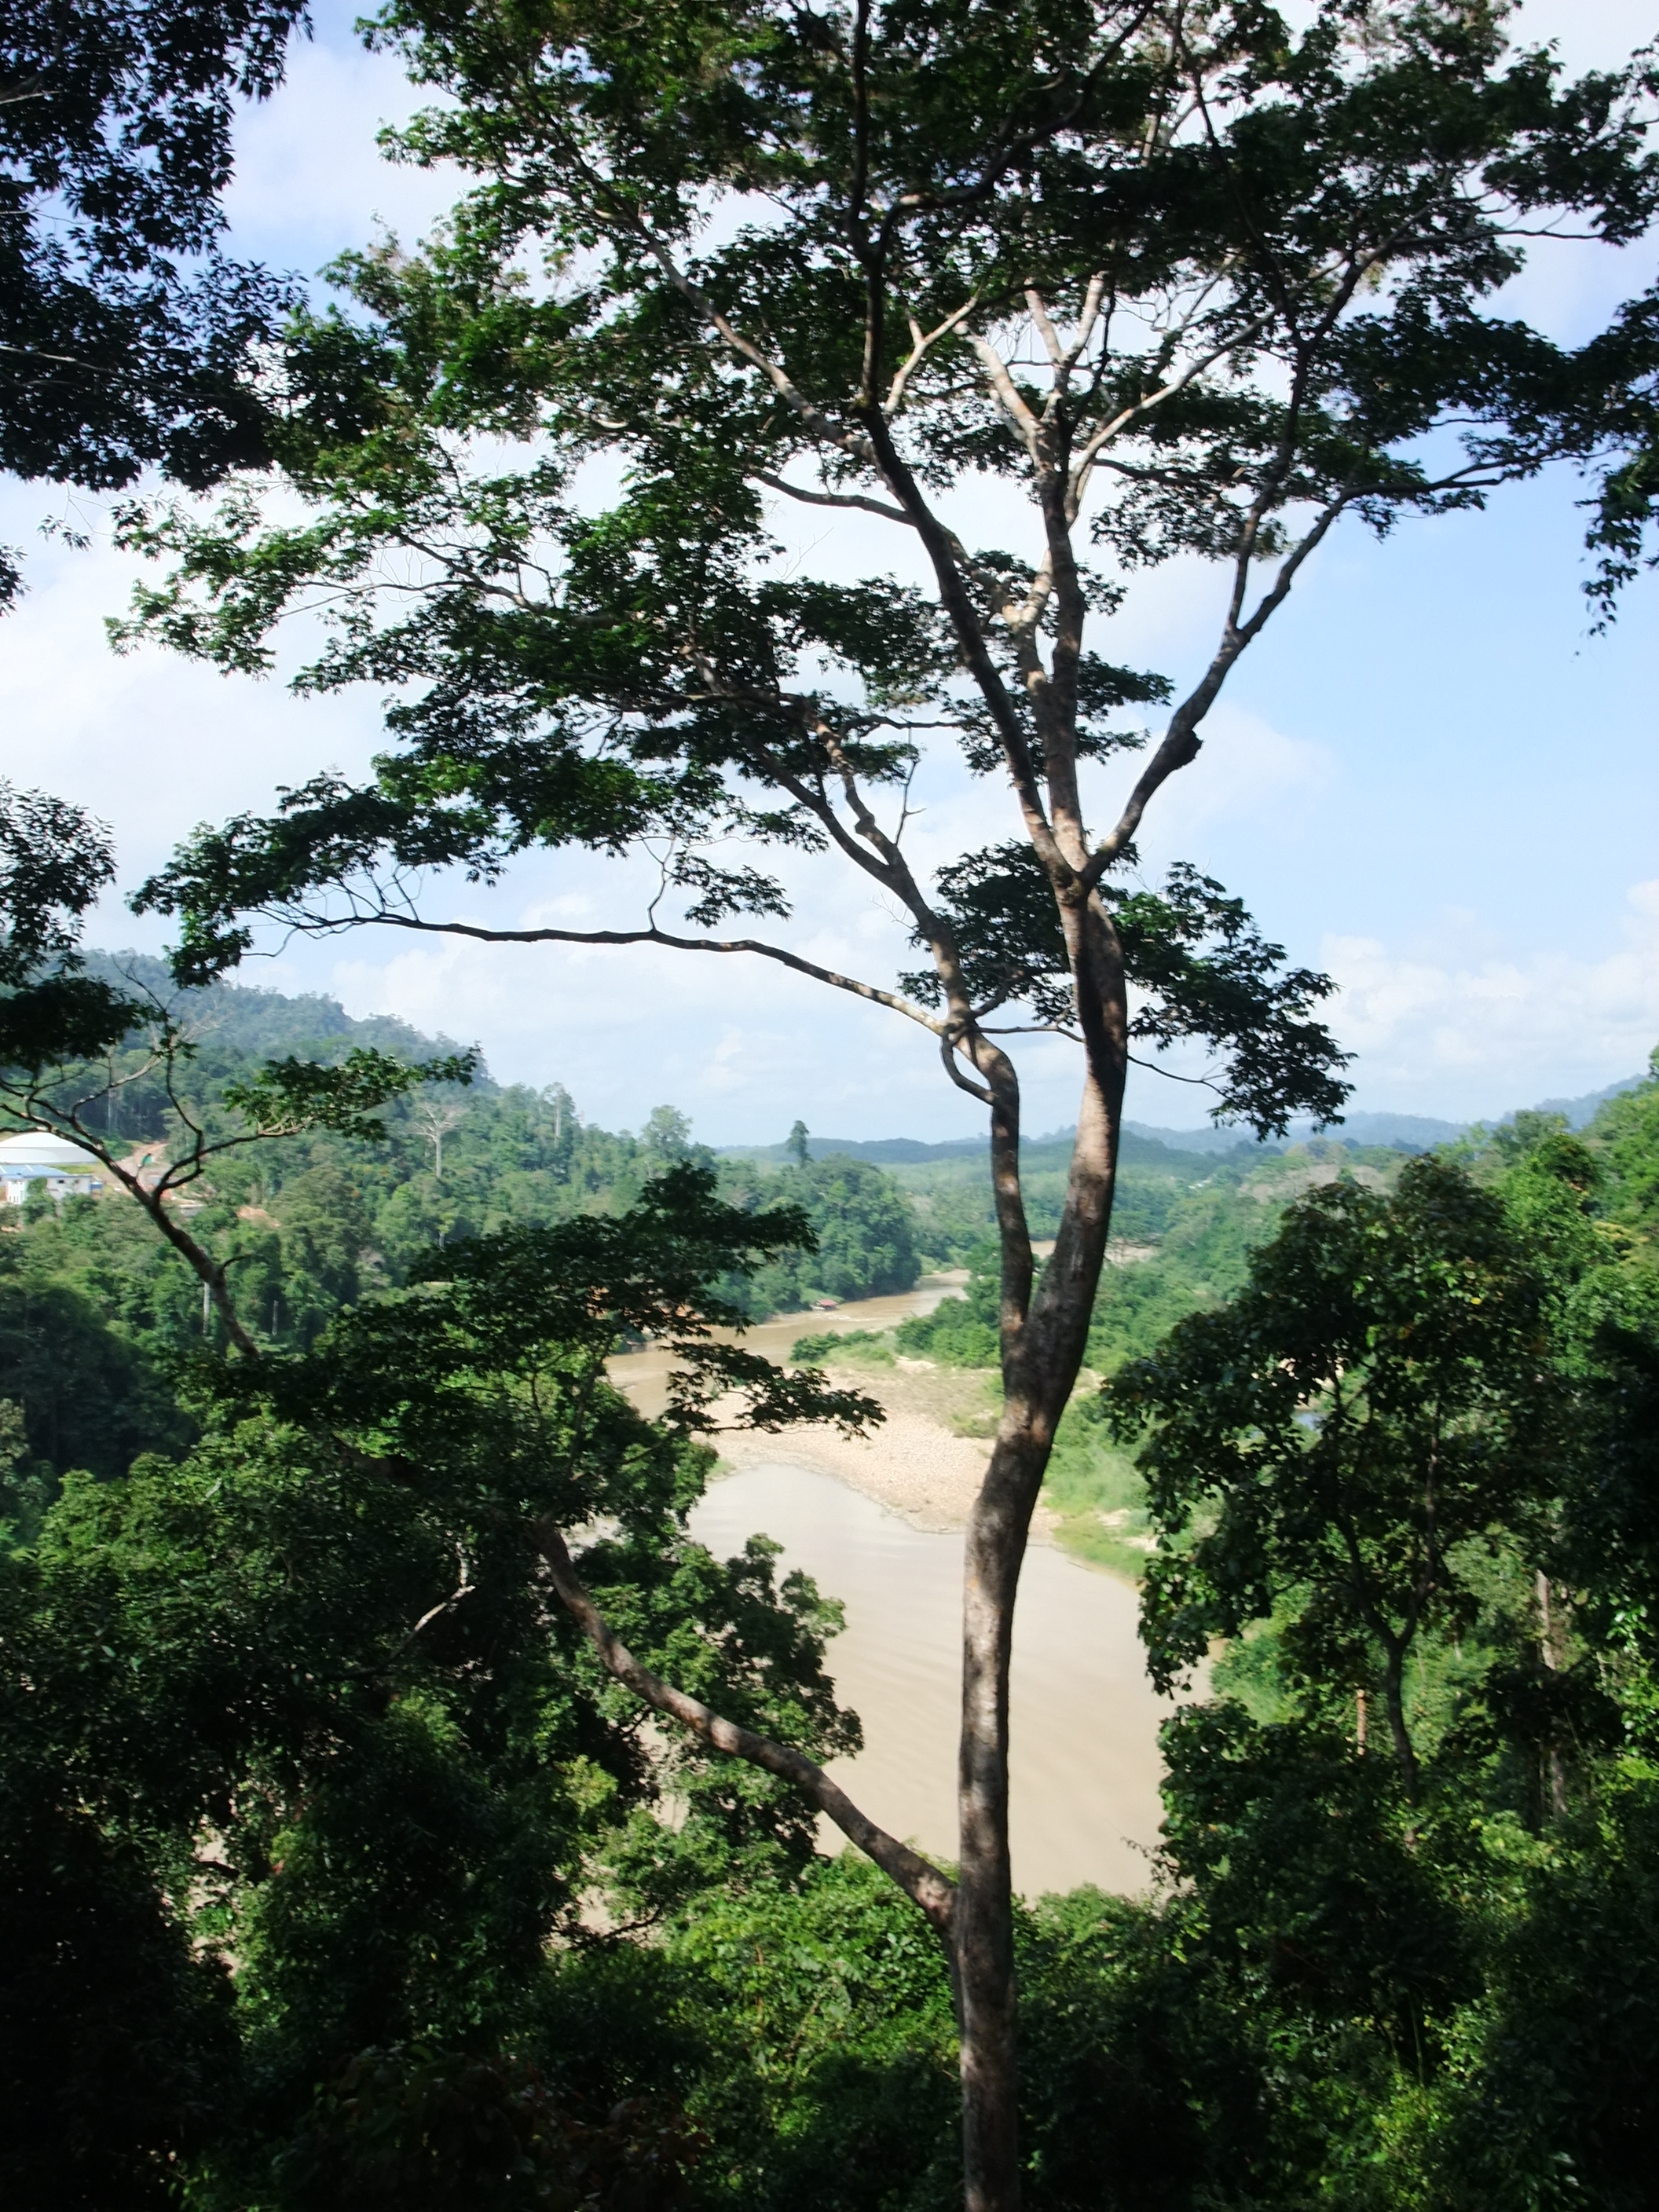 View of Sungai Tembeling from atop the Canopy 